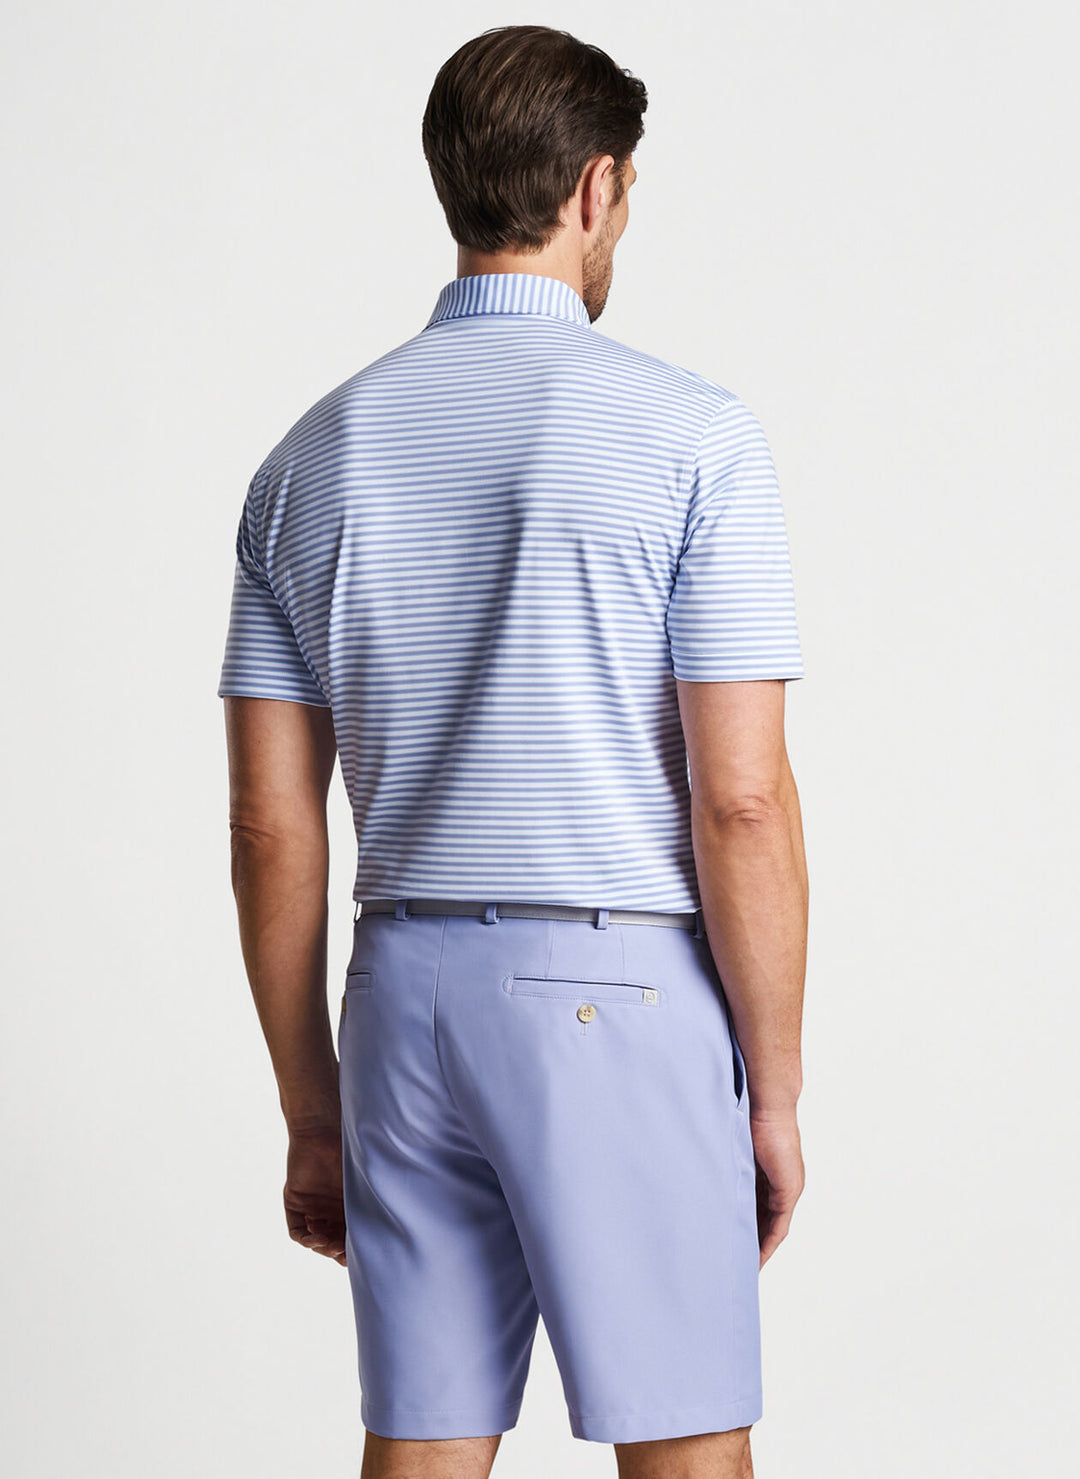 Peter Millar Empire Performance Jersey Polo In Lavender Fog